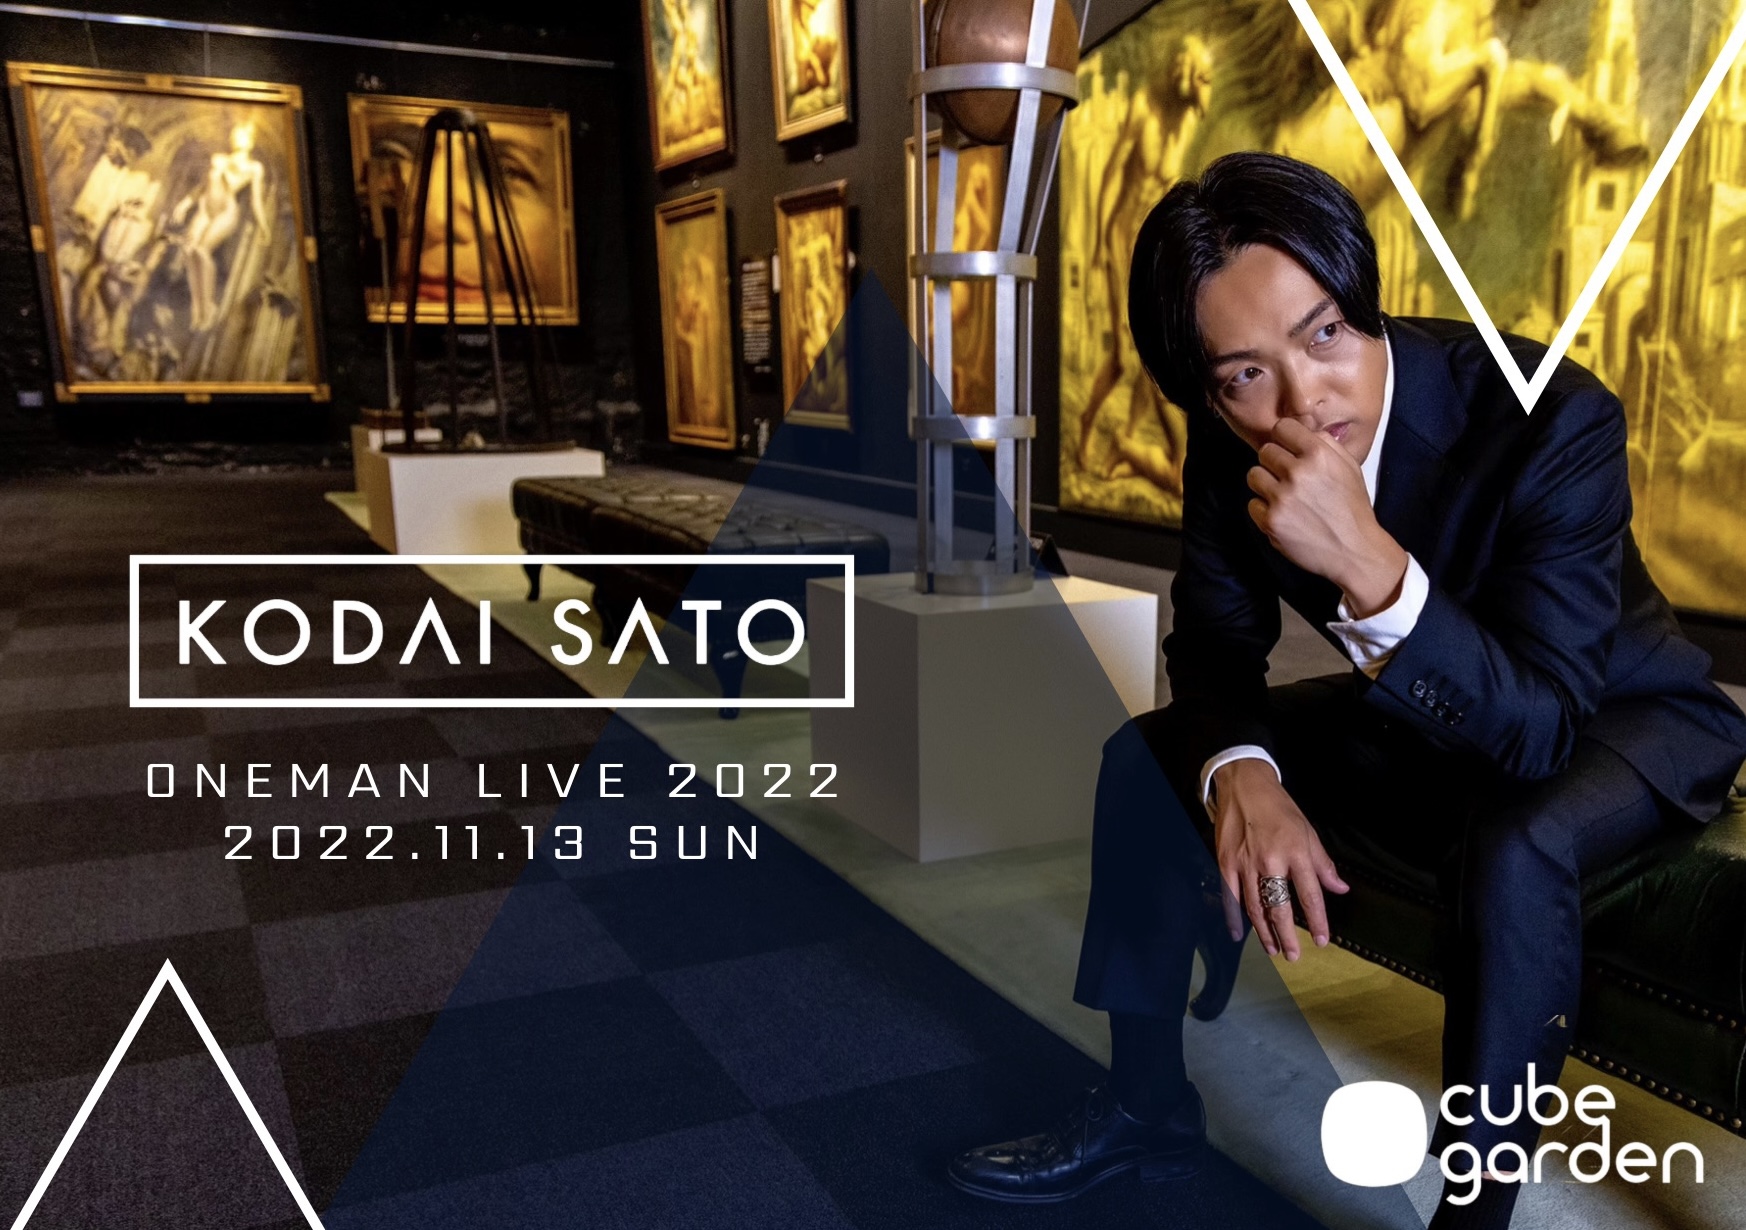 KODAI SATO ONE MAN LIVE 2022 supported by Tomorrow Feat